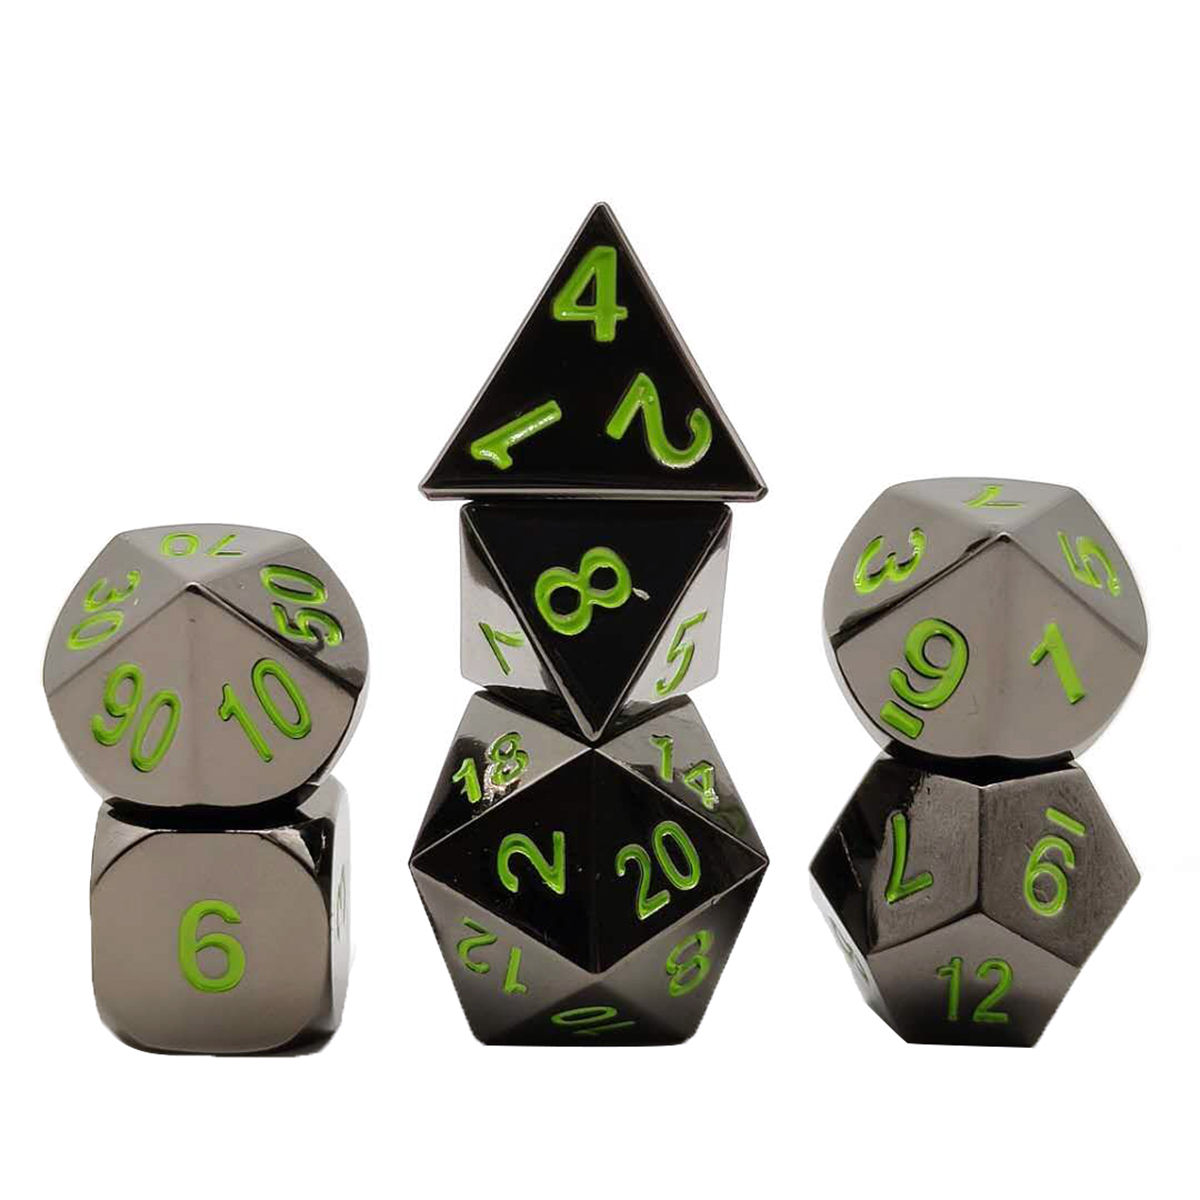 7-PcsSet-Metal-Dice-Set-Role-Playing-Dragons-Table-Game-With-Cloth-Bag-Bar-Party-Game-Dice-1677684-4